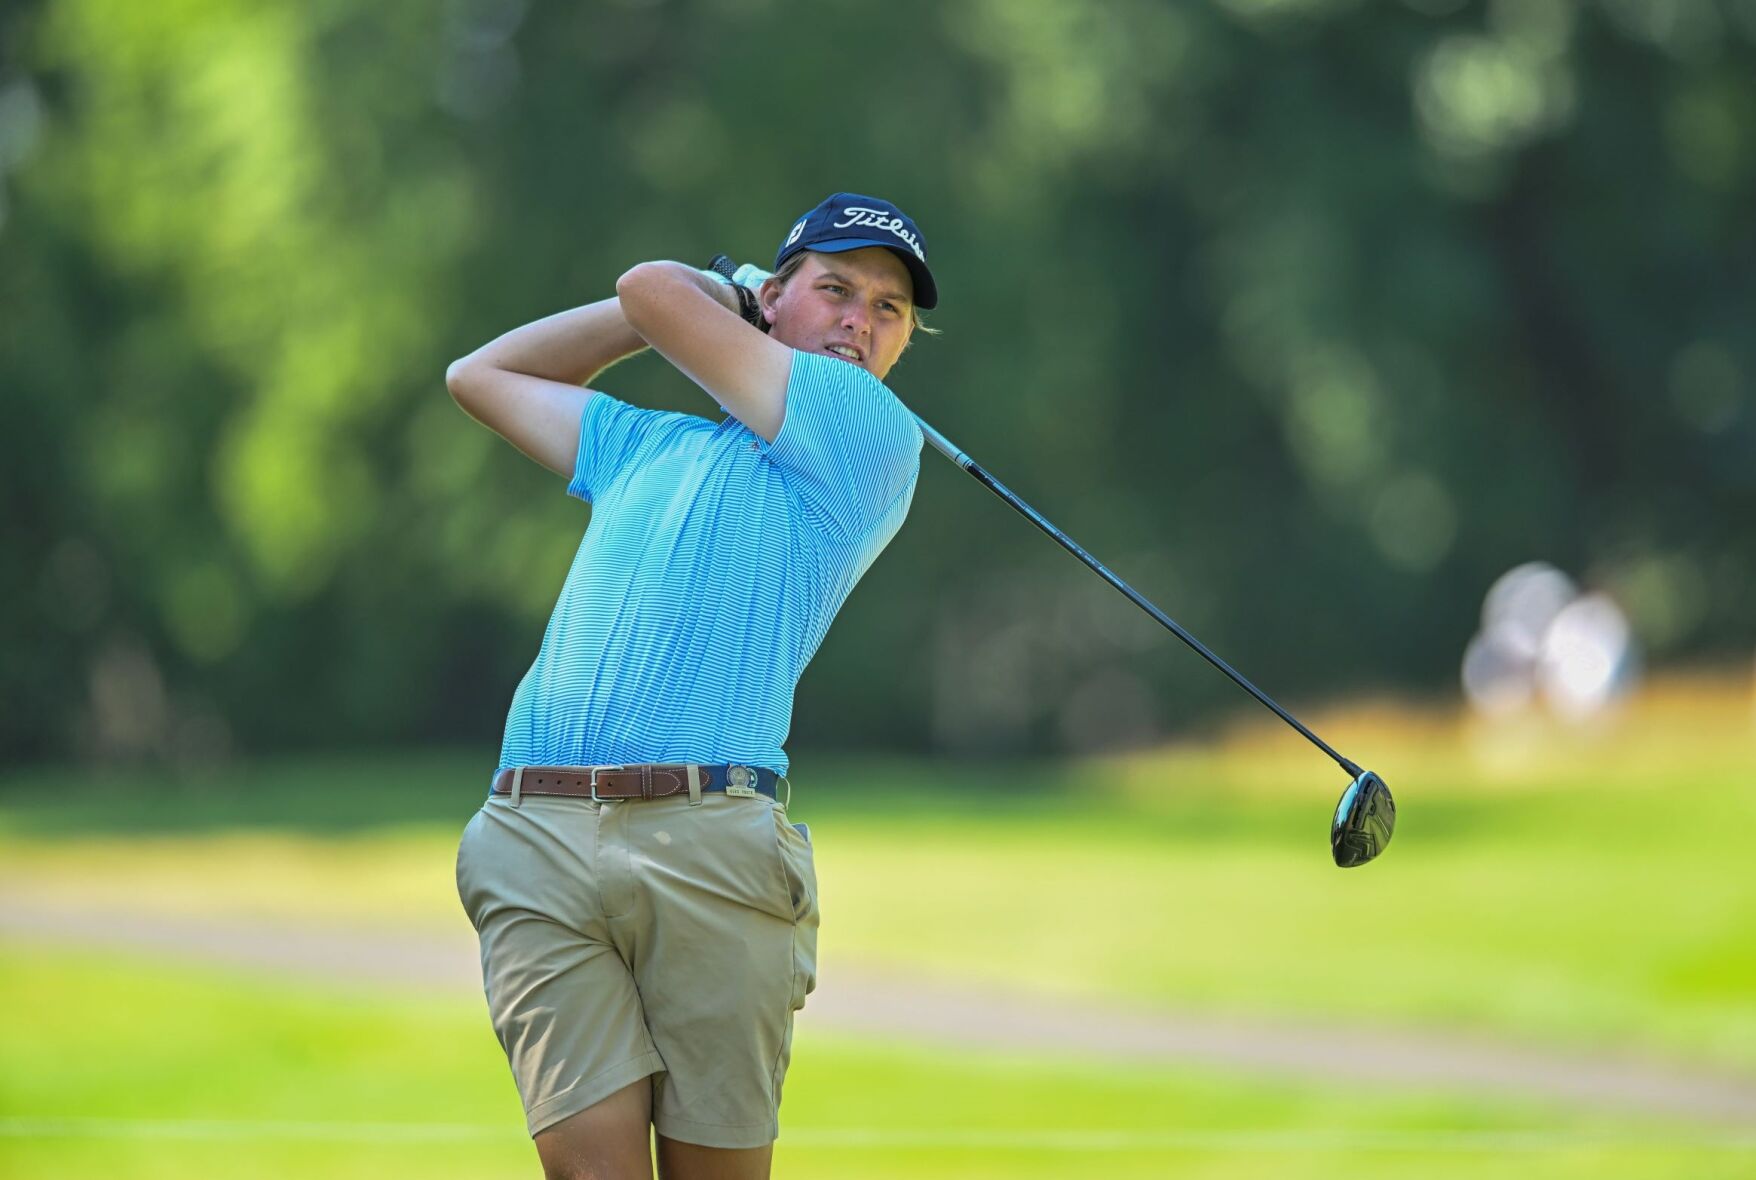 UPDATE Price storms into quarterfinals at U.S Amateur Sports loudountimes